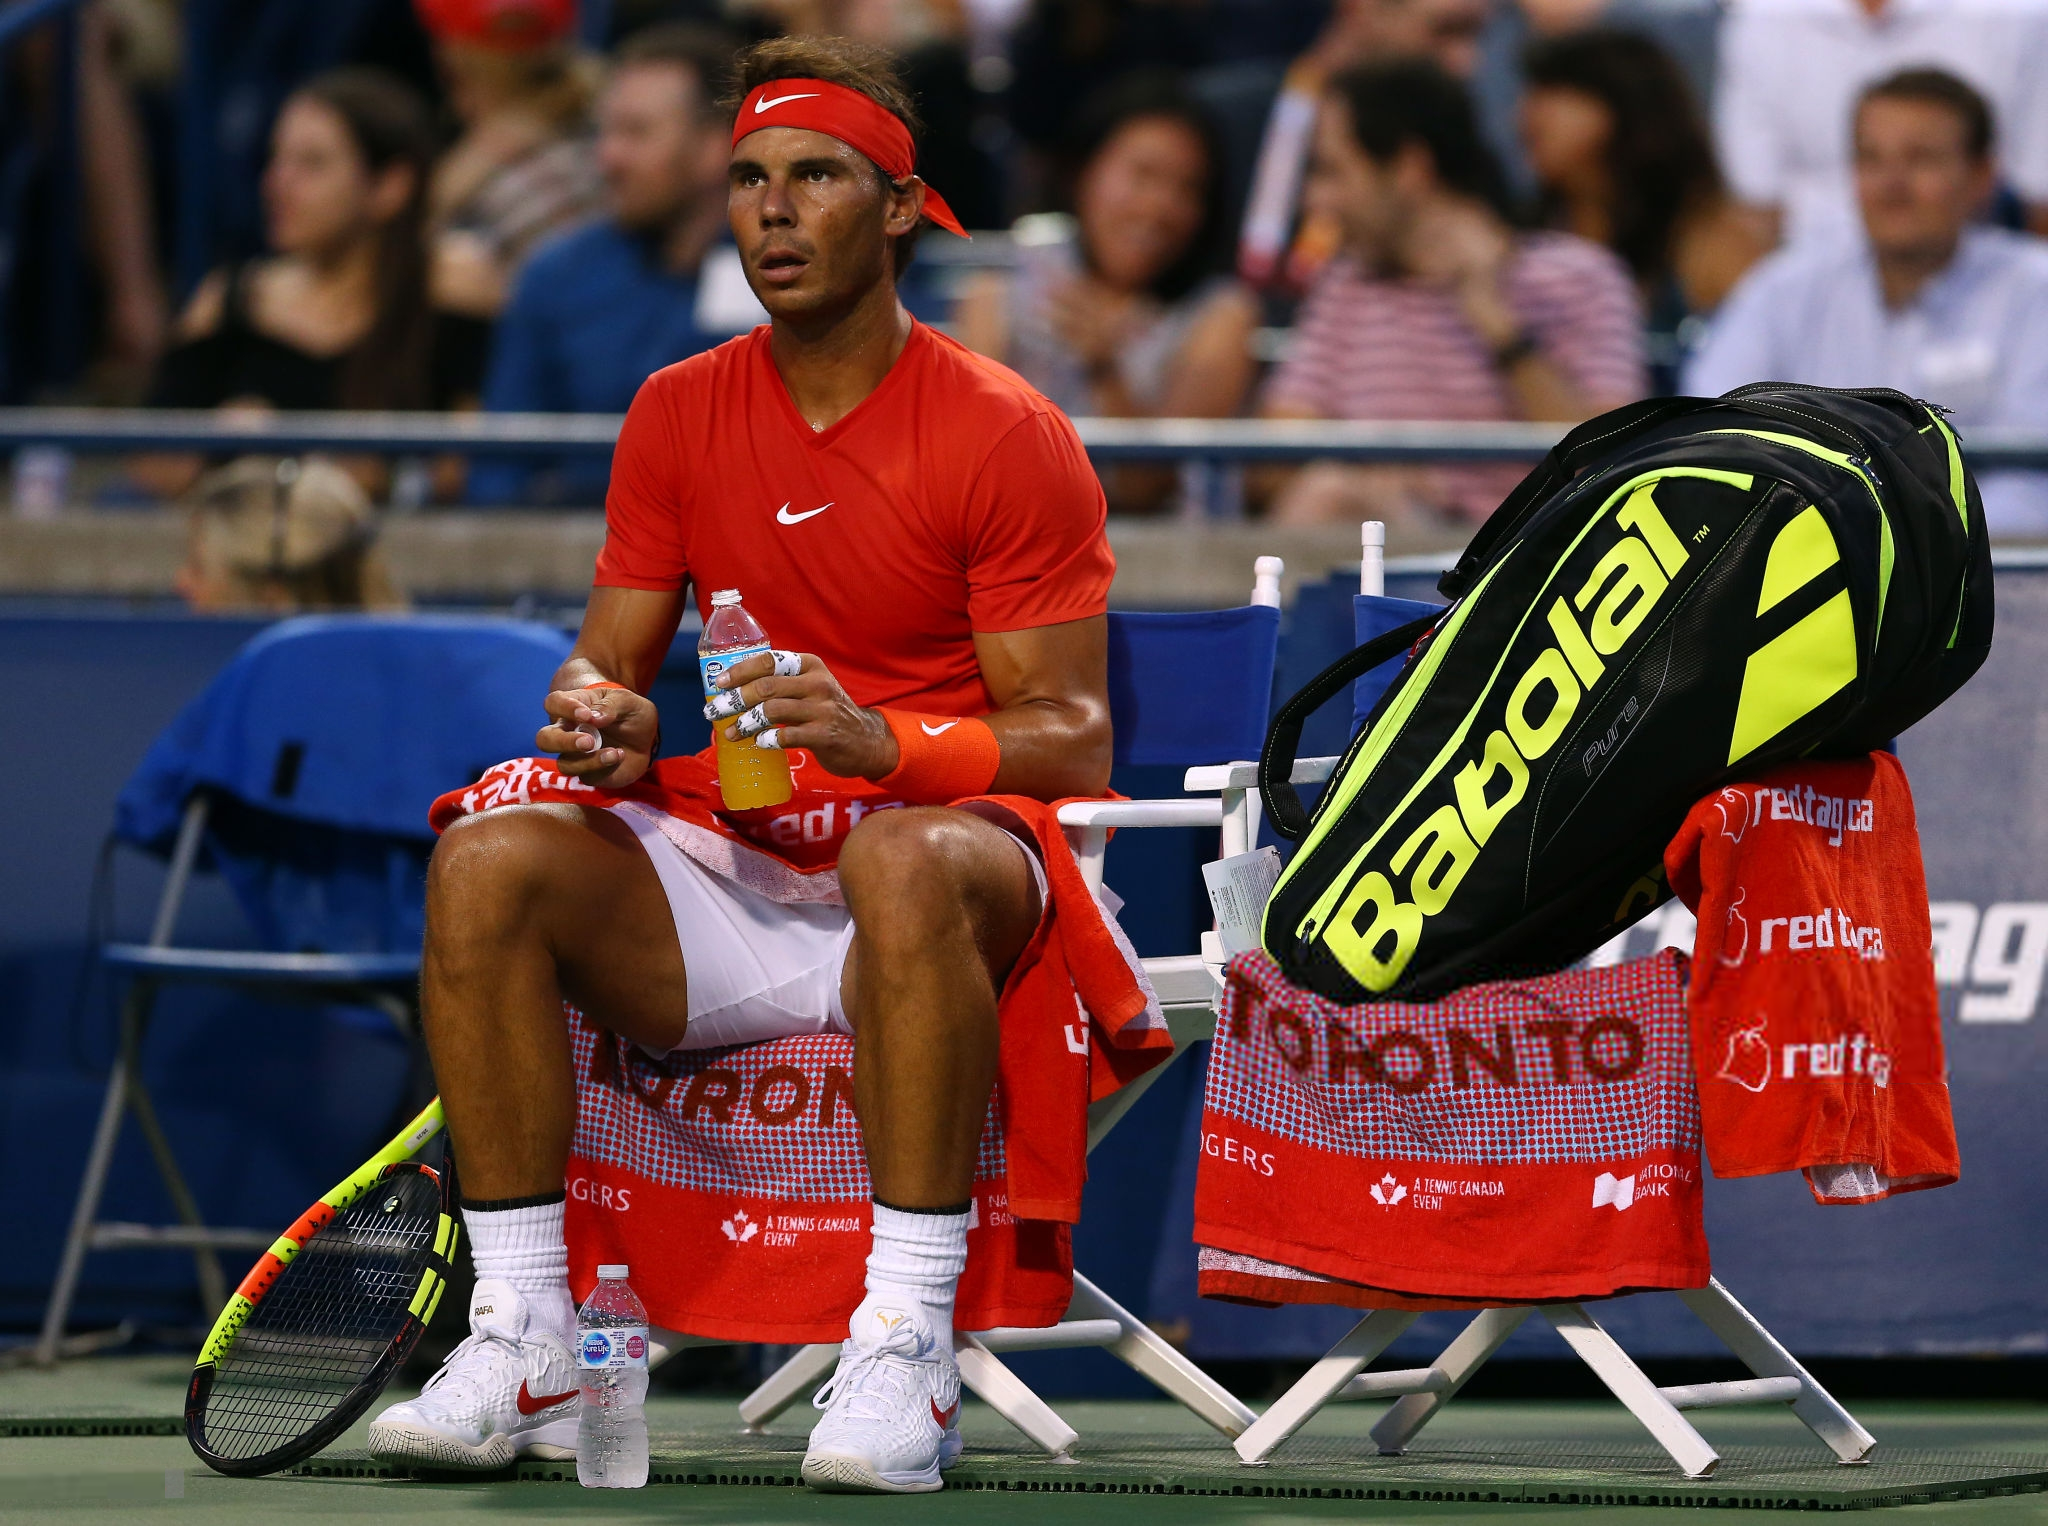 rafael-nadal-during-quarterfinal-match-against-marin-cilic-in-toronto-2018-rogers-cup-photo-4.png